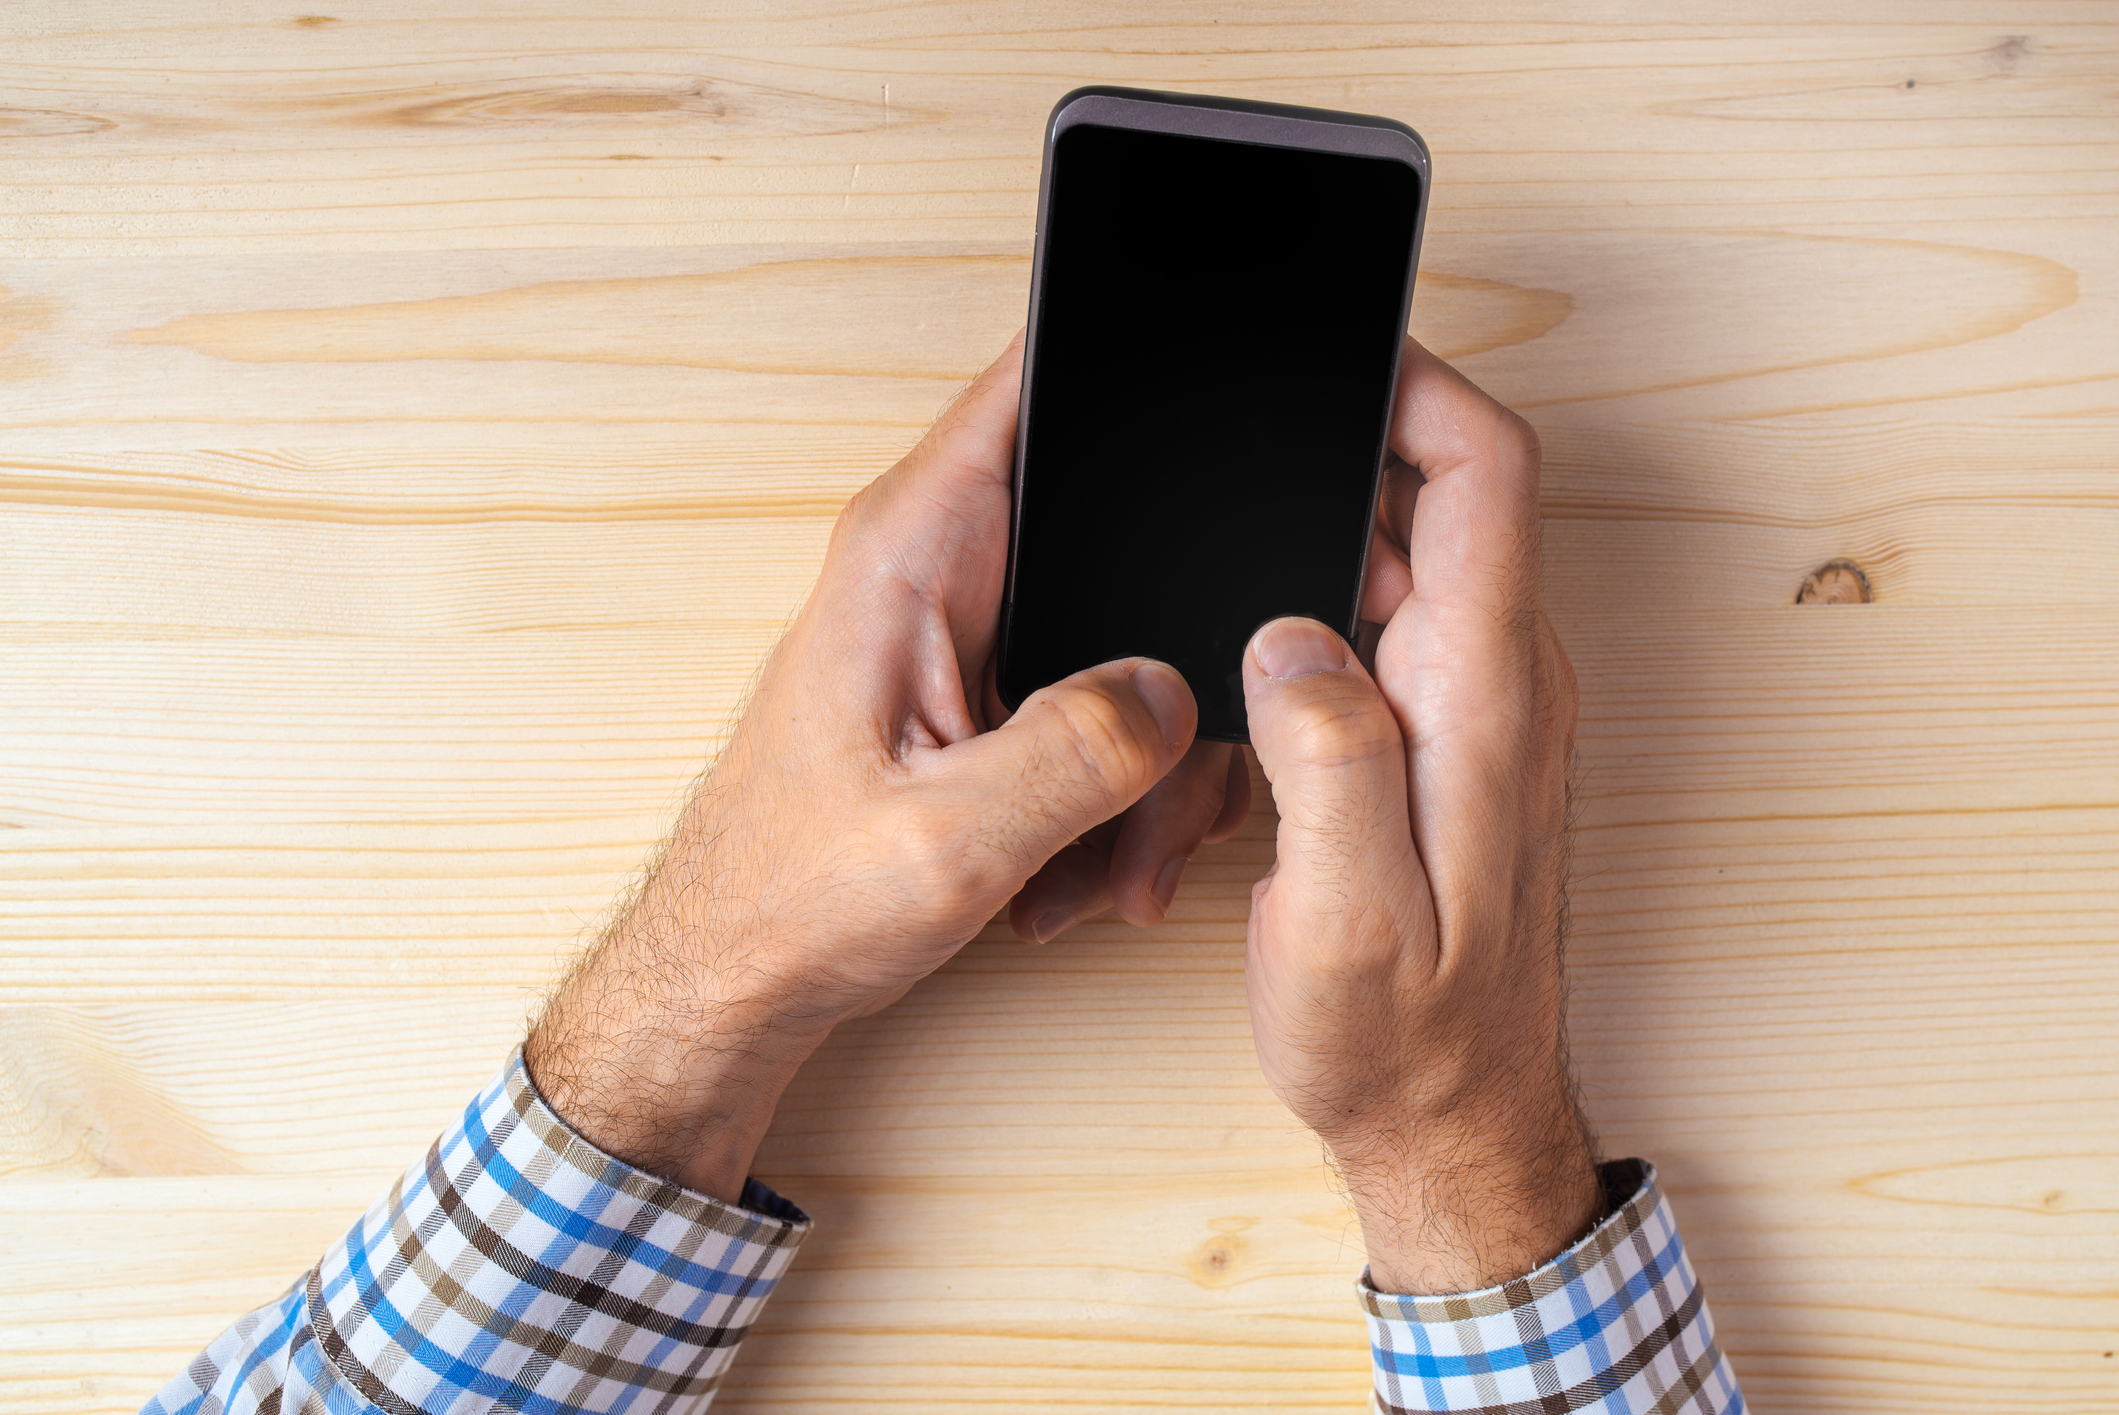 3 Hacks To Help Relieve “Texting Thumb” And Stay Productive